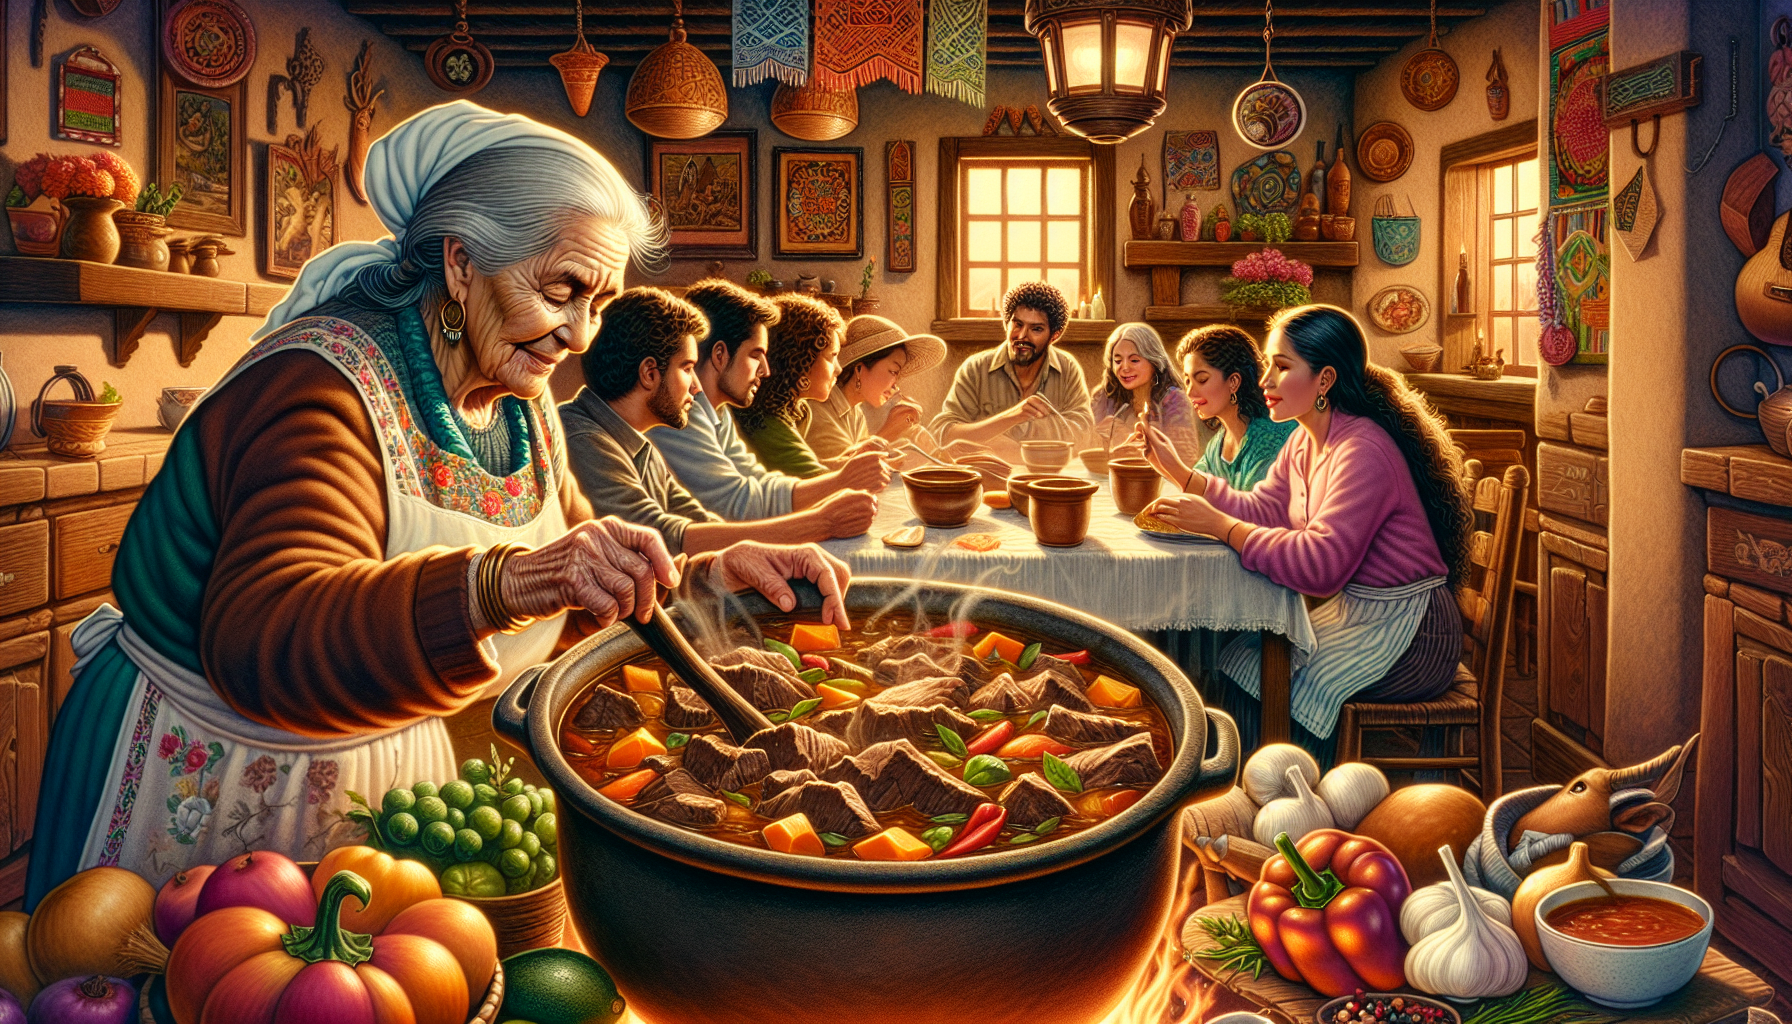 Caldo de res: a Latin tradition of healing, community, and culinary delight